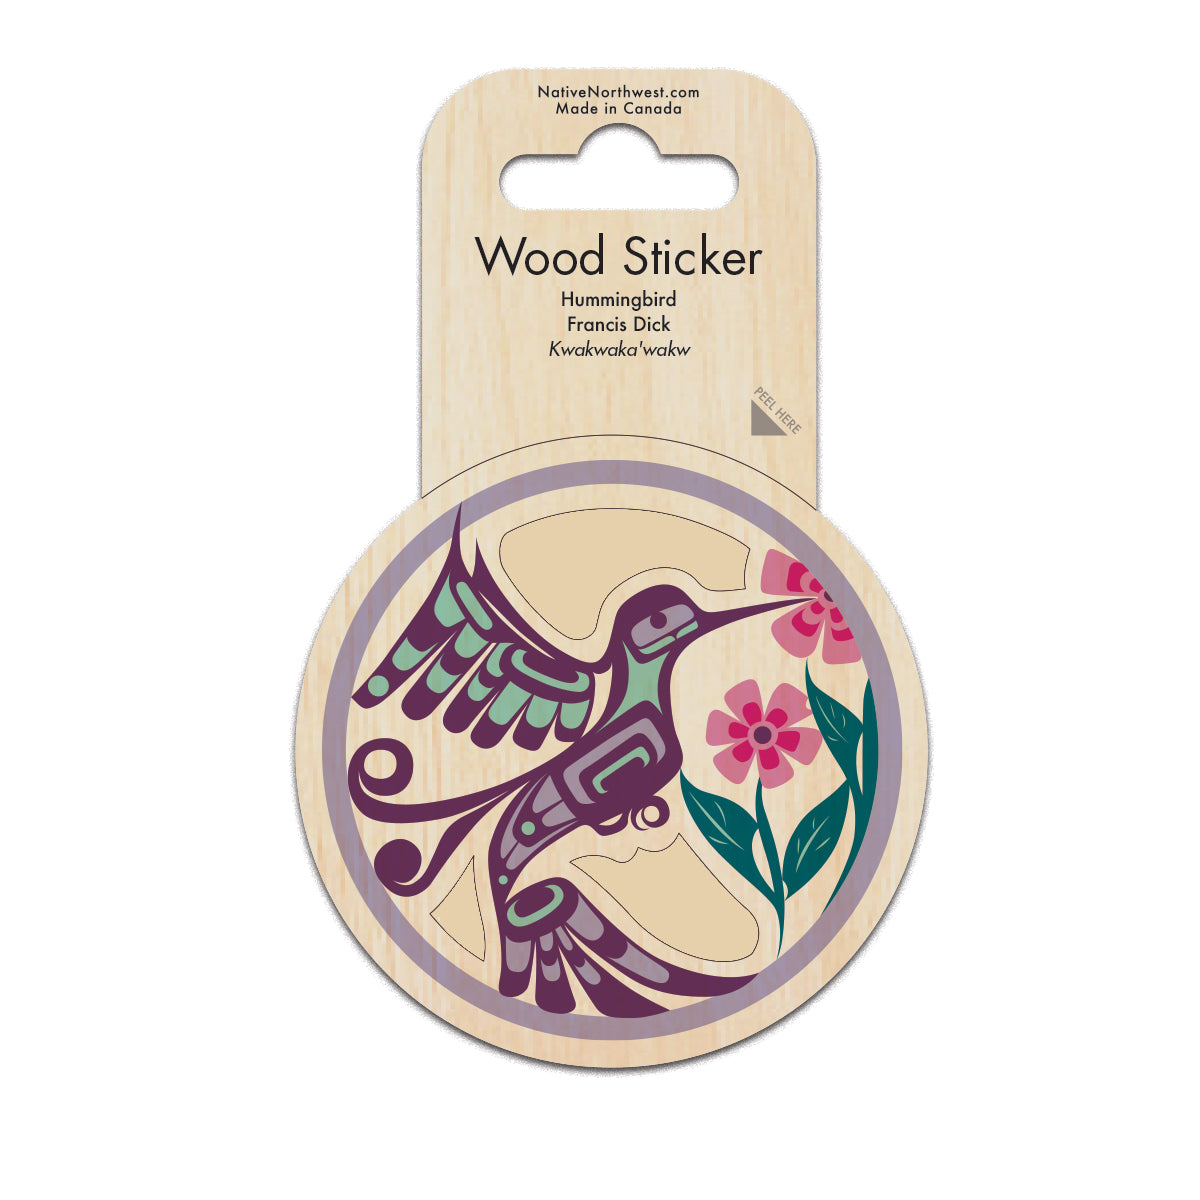 Wood Stickers Hbird - Wood Stickers Hbird -  - House of Himwitsa Native Art Gallery and Gifts